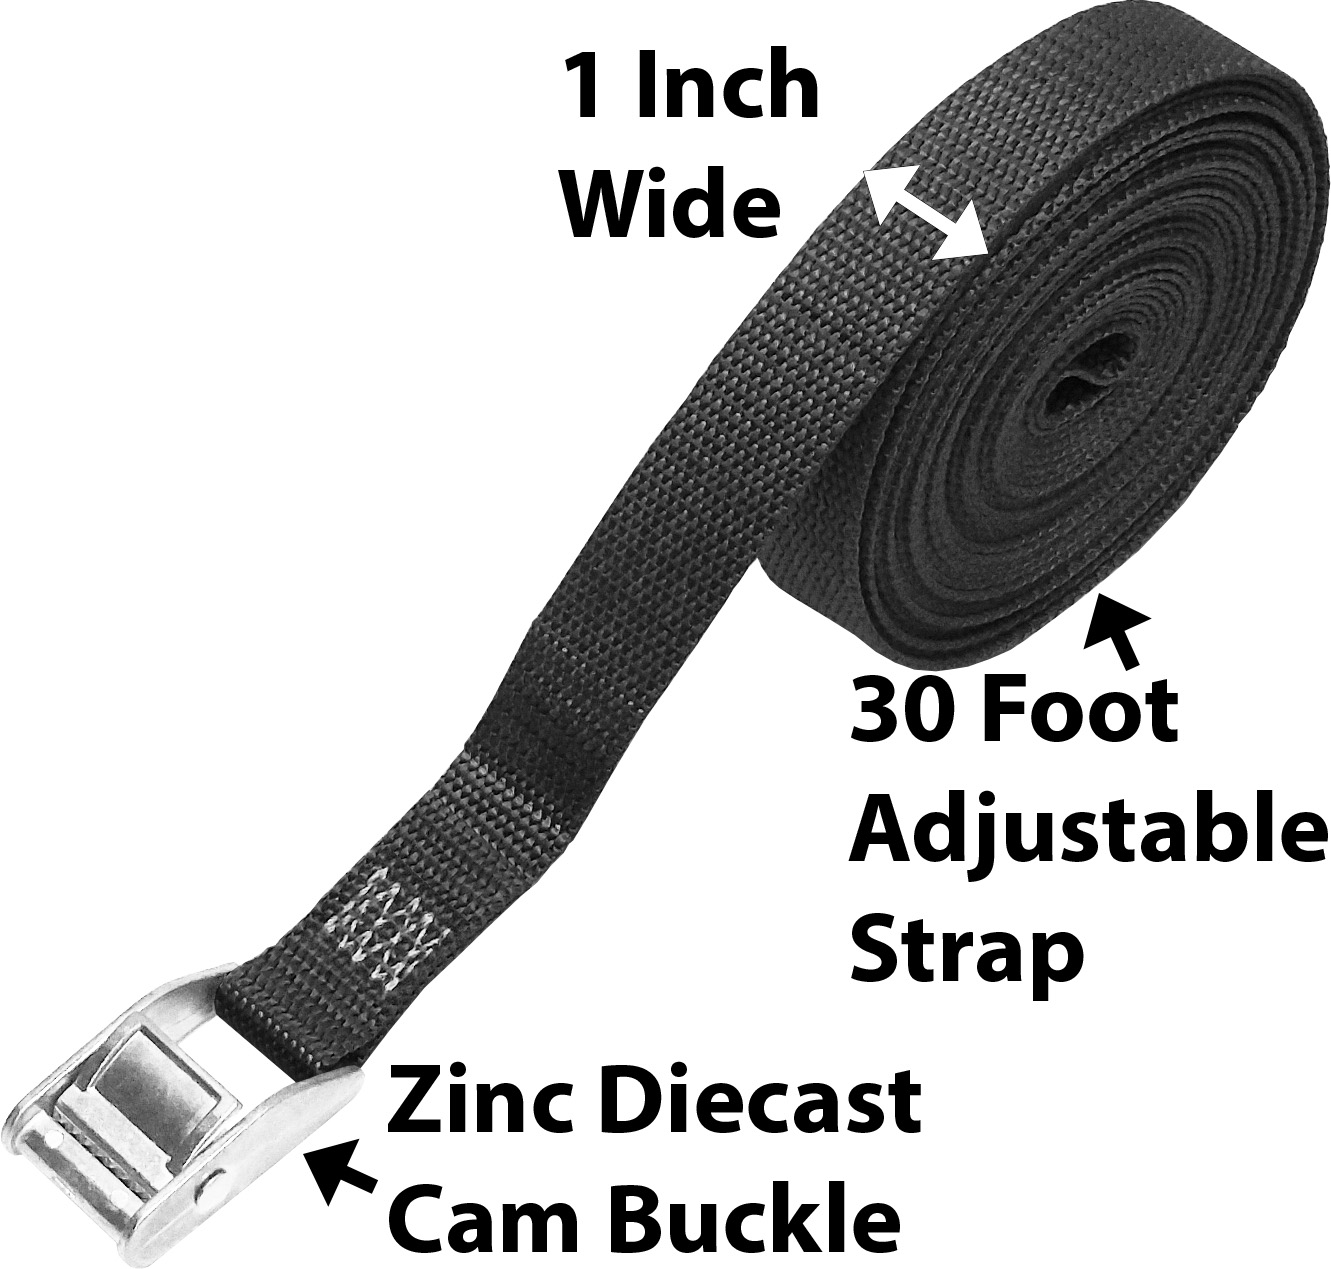 CustomTieDowns 1 Inch x 30 Foot Cinch Strap Endless Loop Tie Down, Loose End Of Strap Is Angle Cut For Easy Feed Through Buckle 2702 - image 2 of 2